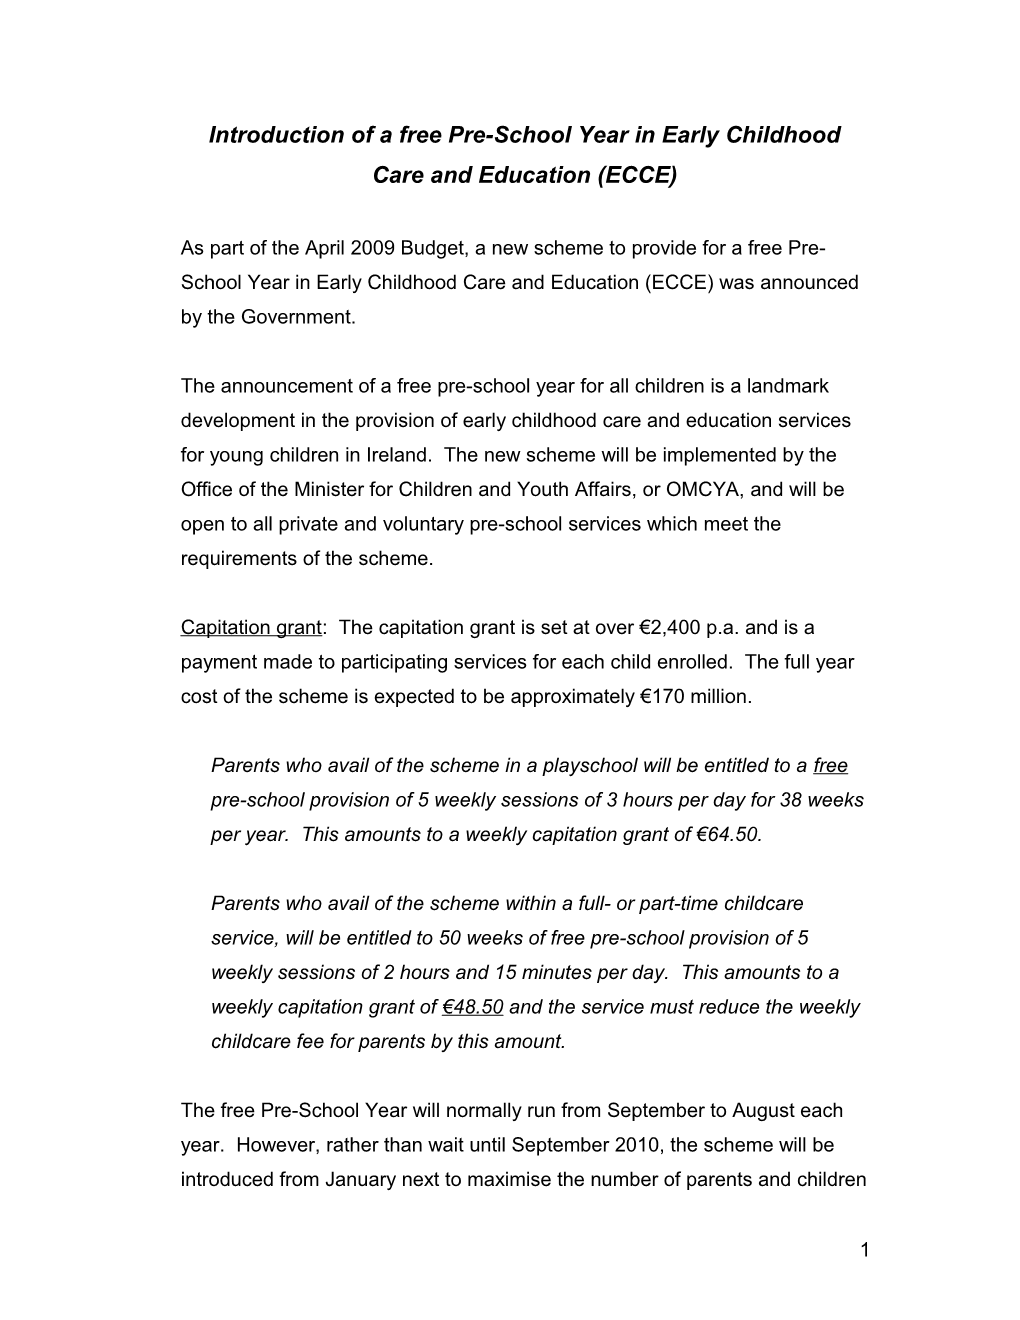 Introduction of a Free Pre-School Year in Early Childhood Care and Education (ECCE)